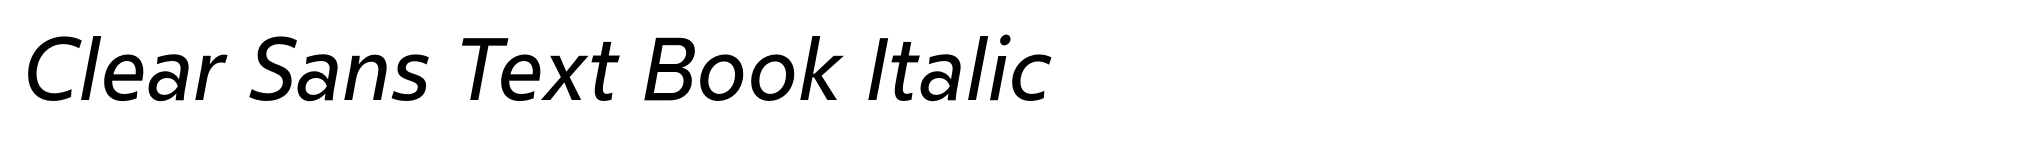 Clear Sans Text Book Italic image